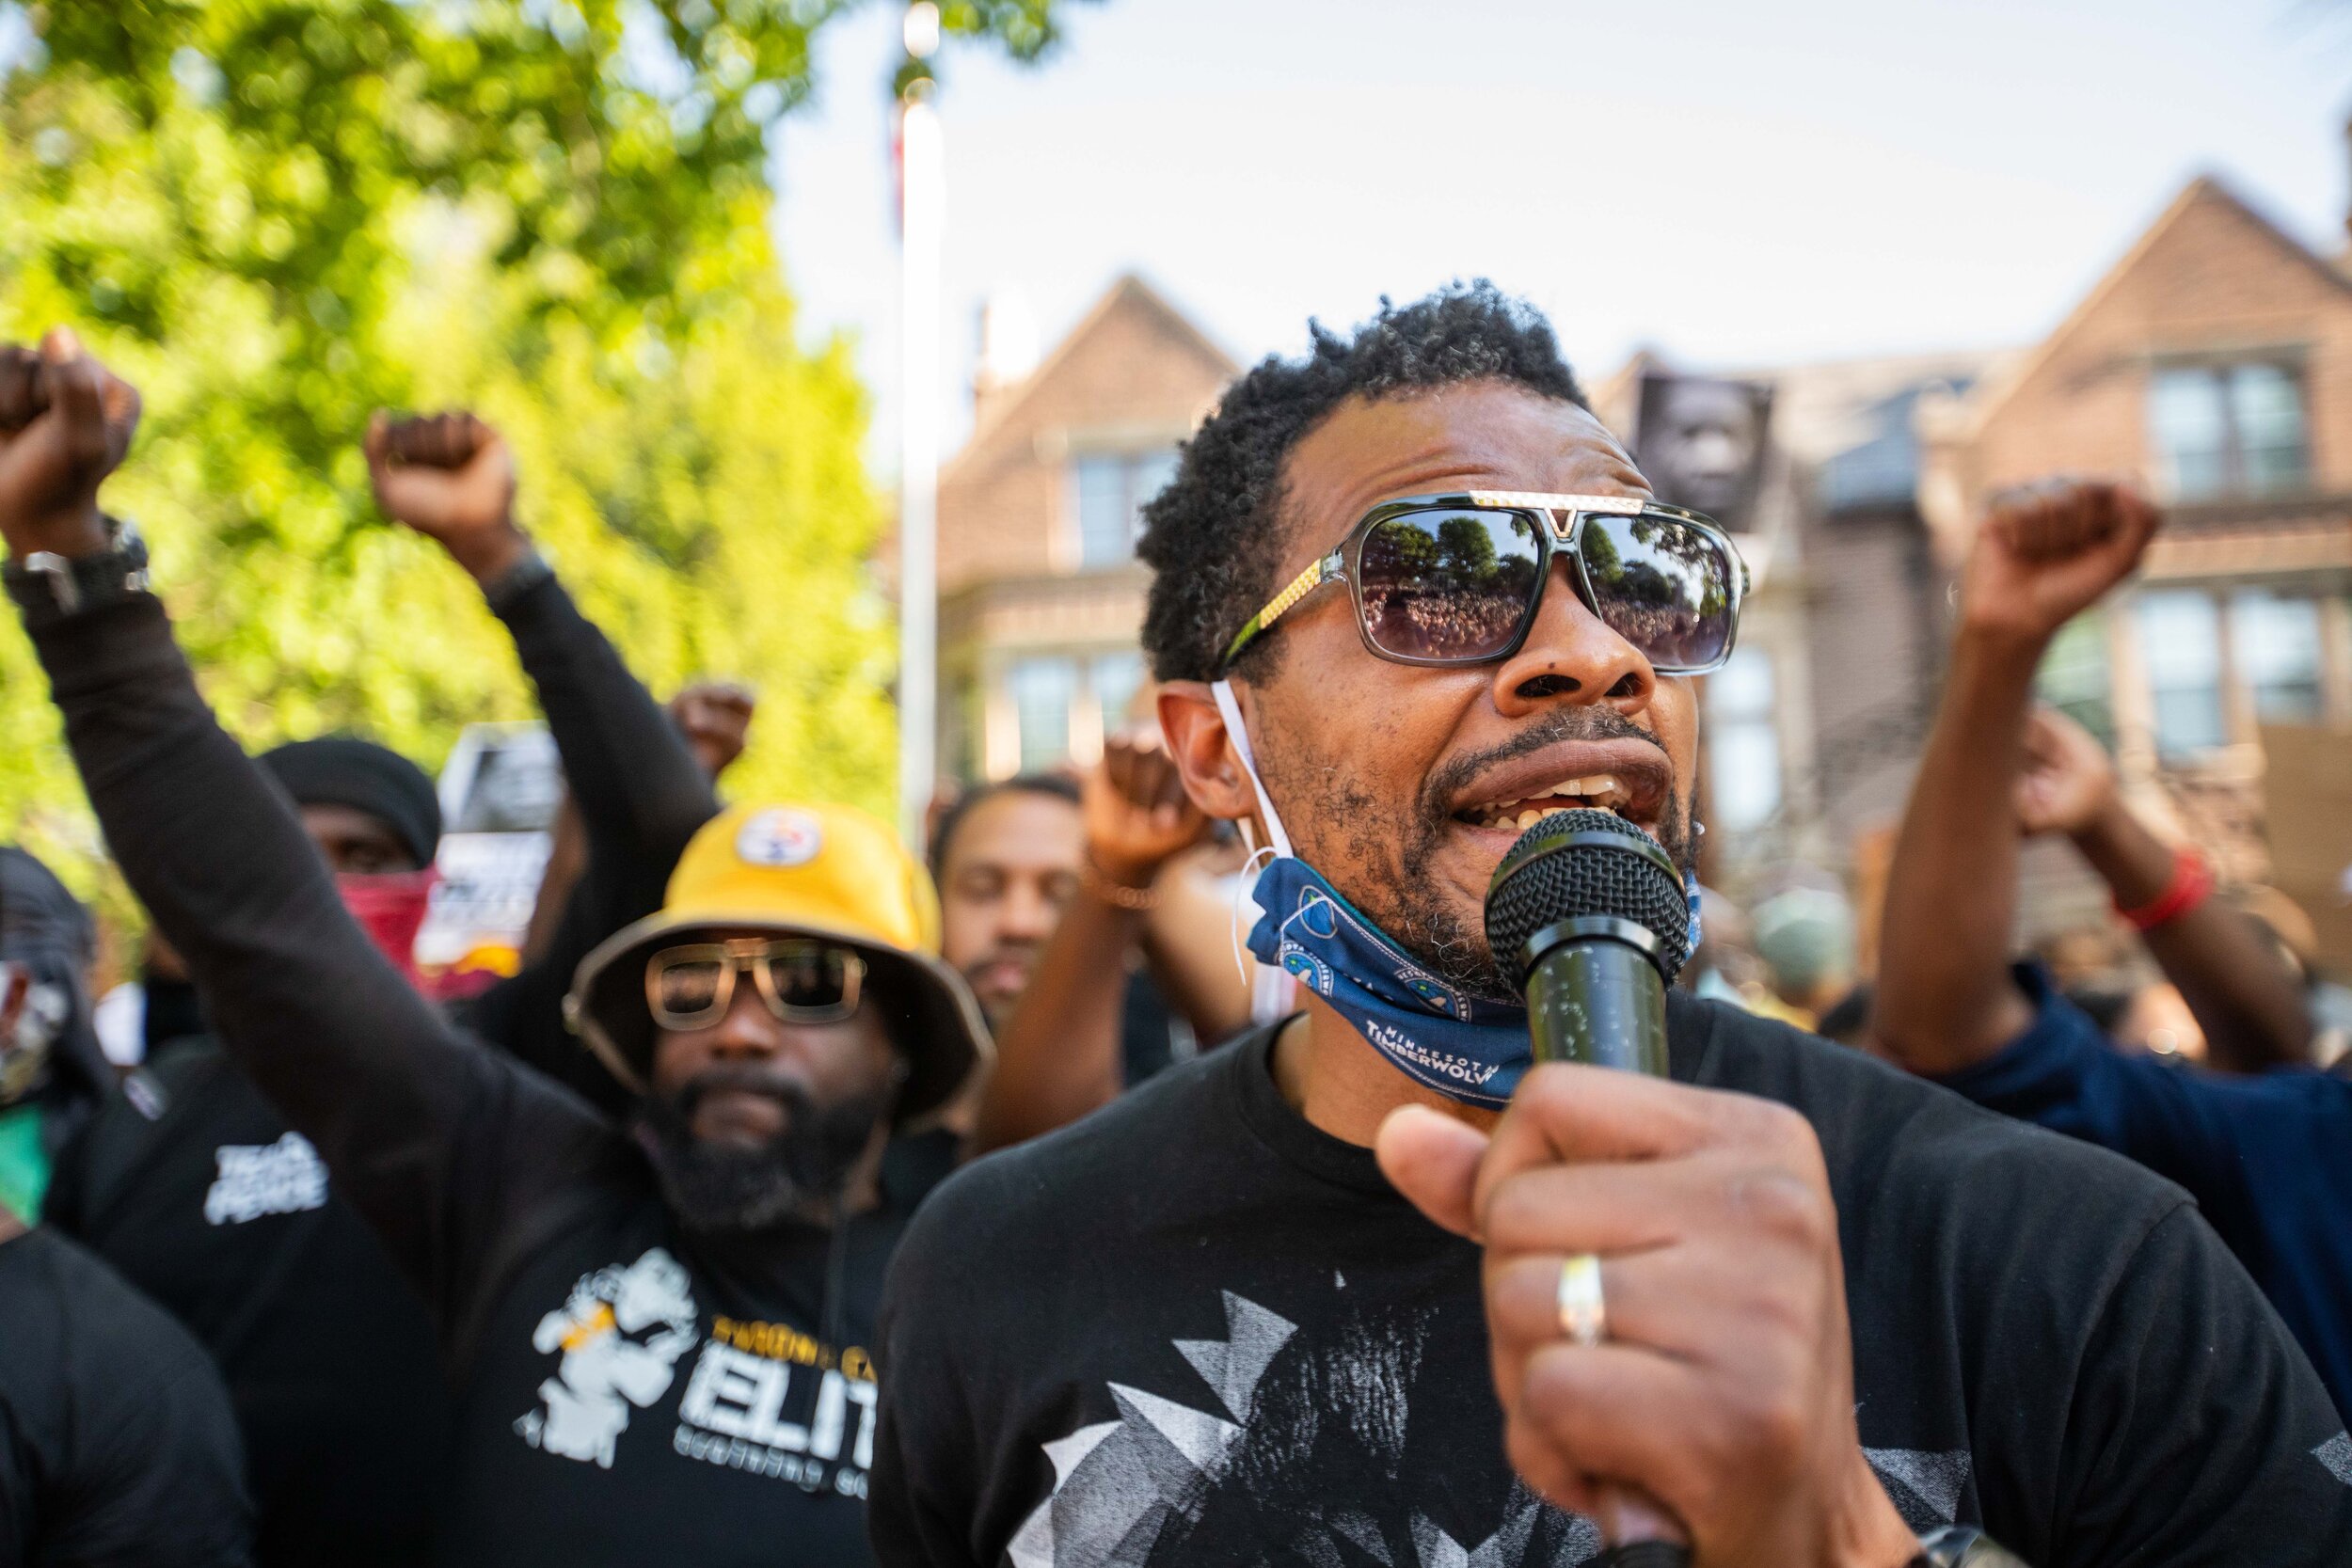  Marquis Armstrong speaks to the crowd of protesters that came out over the police killing of George Floyd in front of the Governors Mansion in Saint Paul, Minnesota on June 1, 2020. Chris Juhn/Zenger 